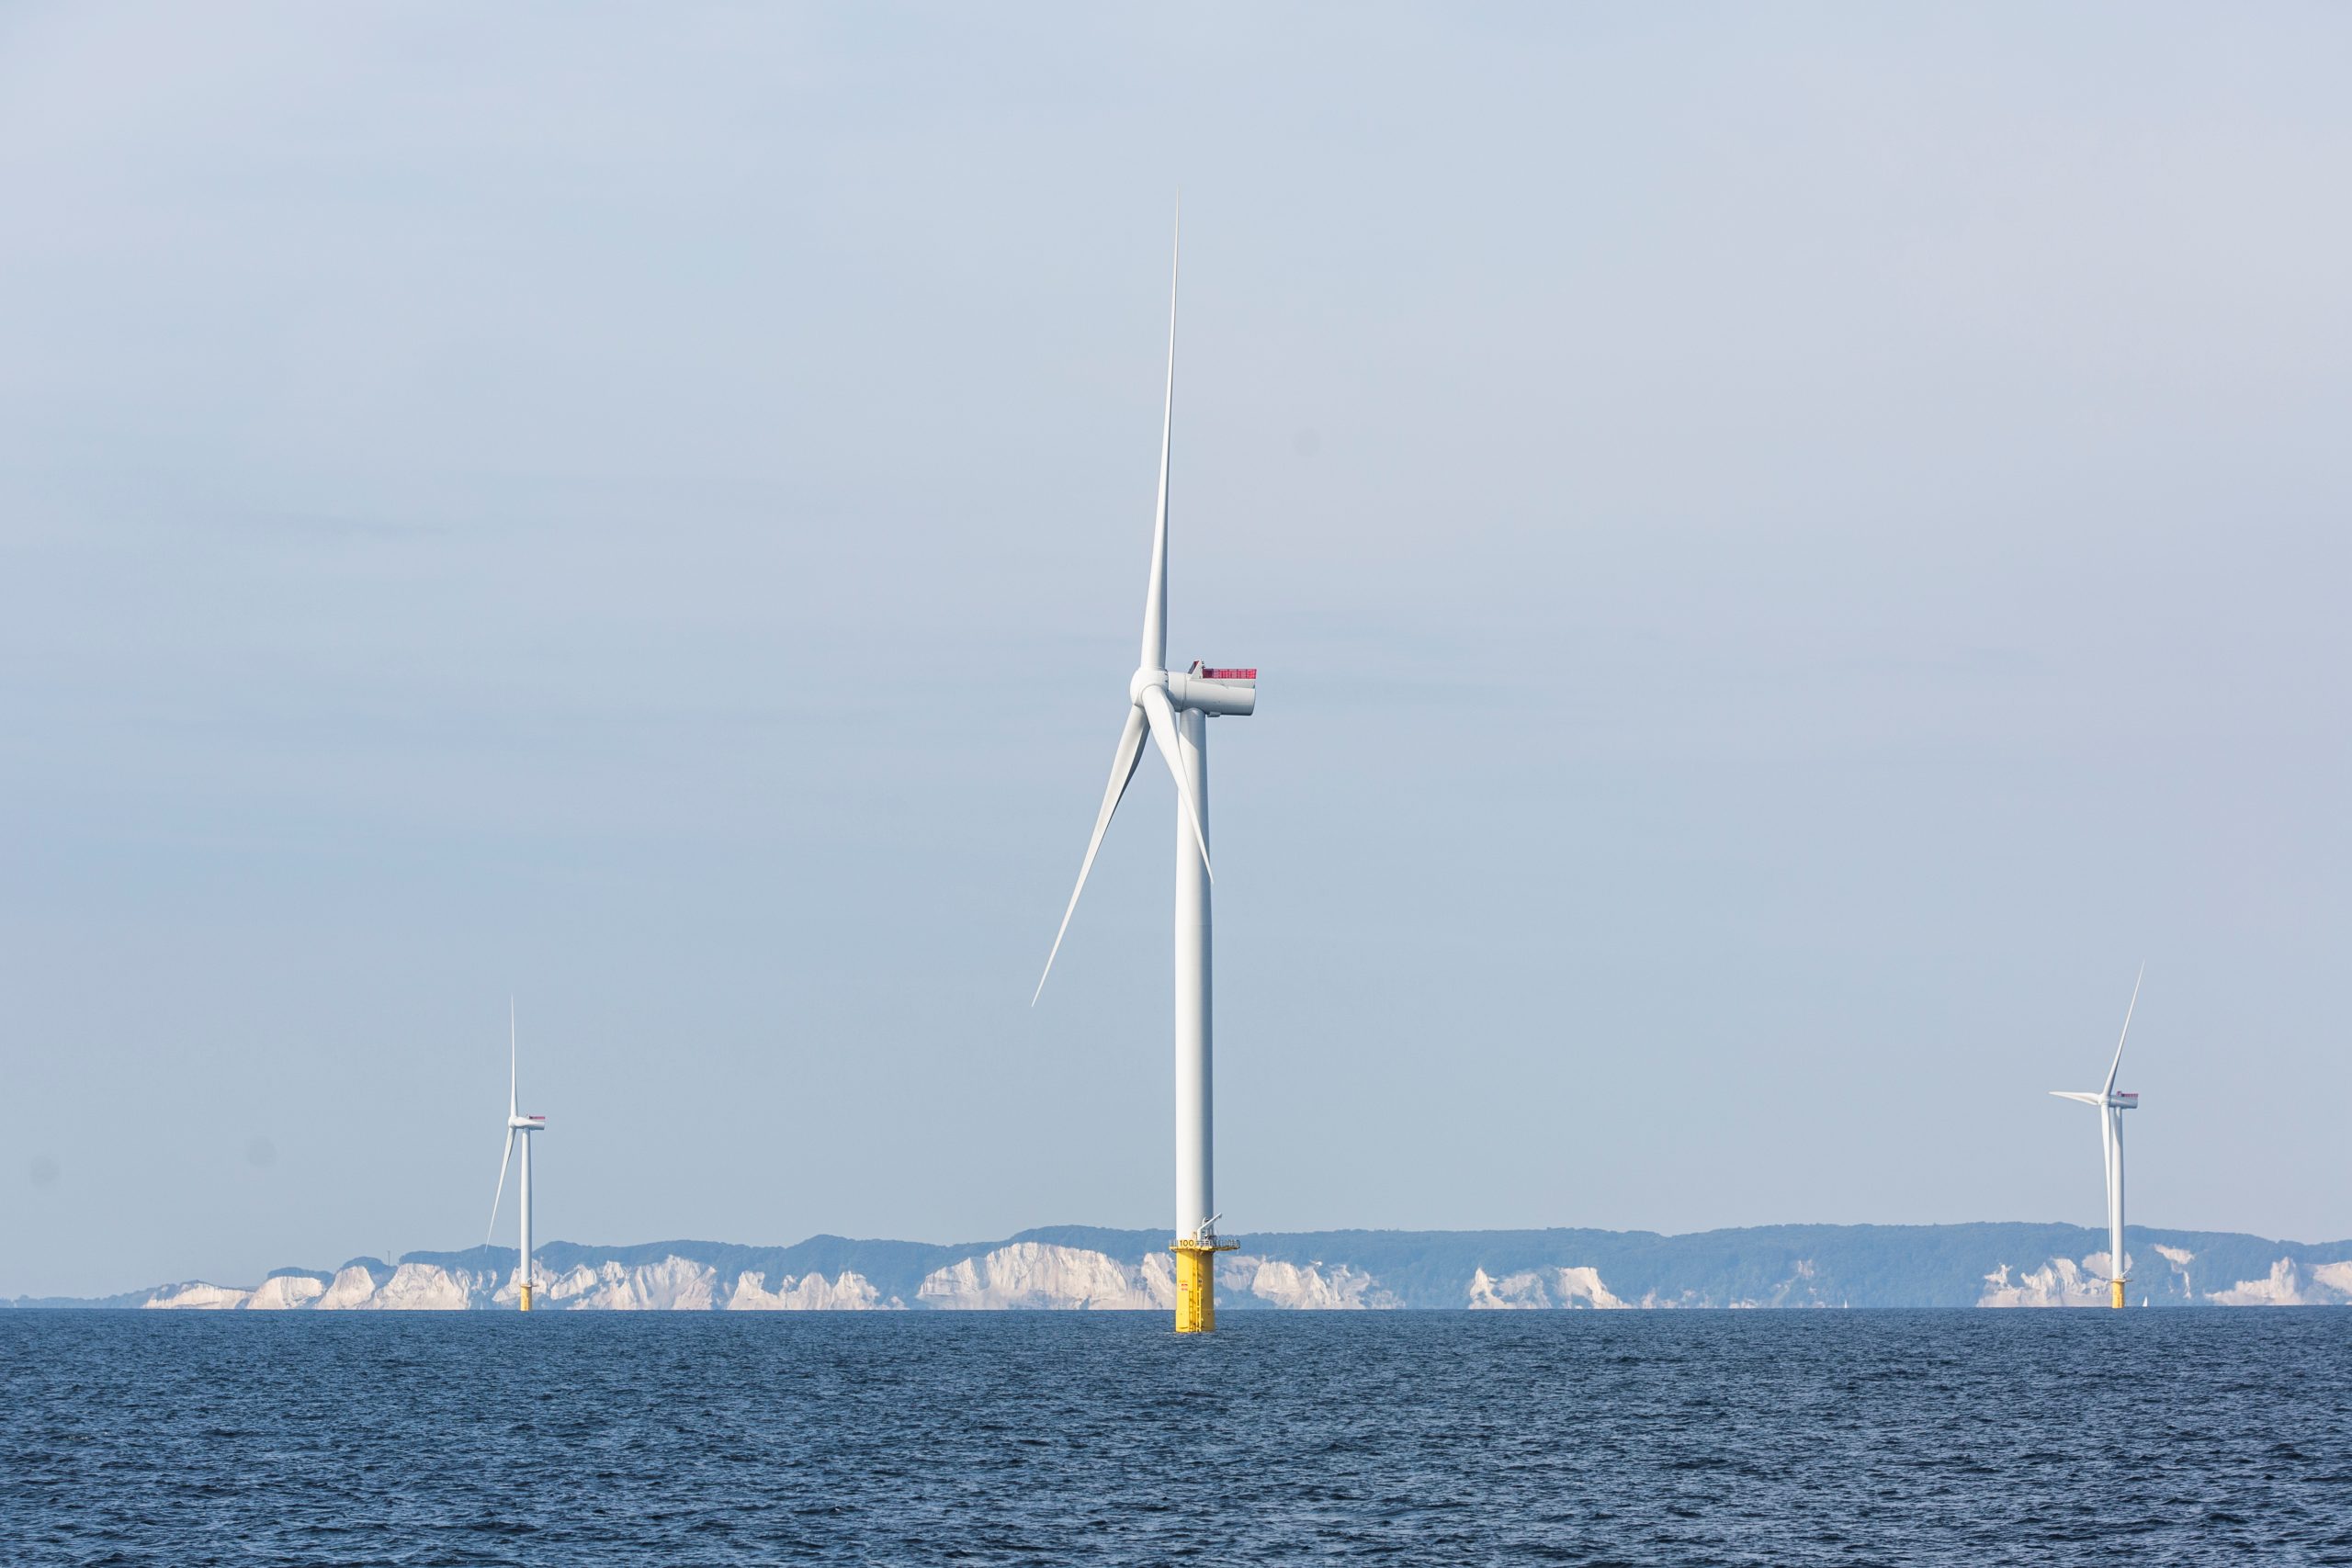 Photo: Power-generating windmill turbines are seen at an offshore wind farm, Kriegers Flak, in the Baltic Sea between Denmark, Sweden and Germany, September 6, 2021. Credit: Ritzau Scanpix/Olafur Steinar Gestsson/via REUTERS